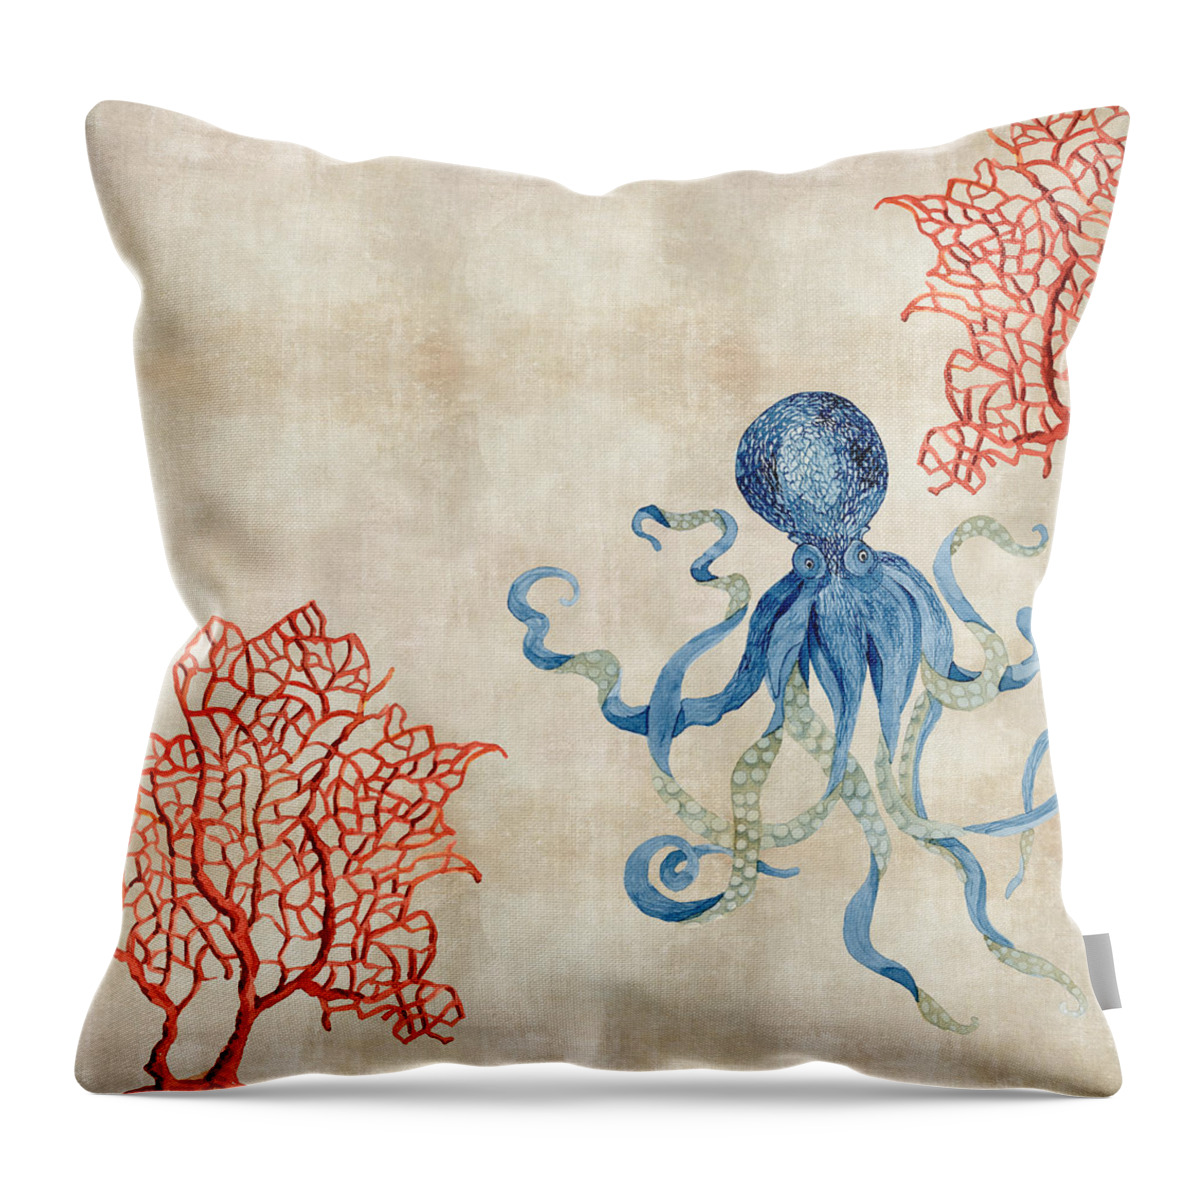 Octopus Throw Pillow featuring the painting Indigo Ocean - Octopus Floating Amid Red Fan Coral by Audrey Jeanne Roberts